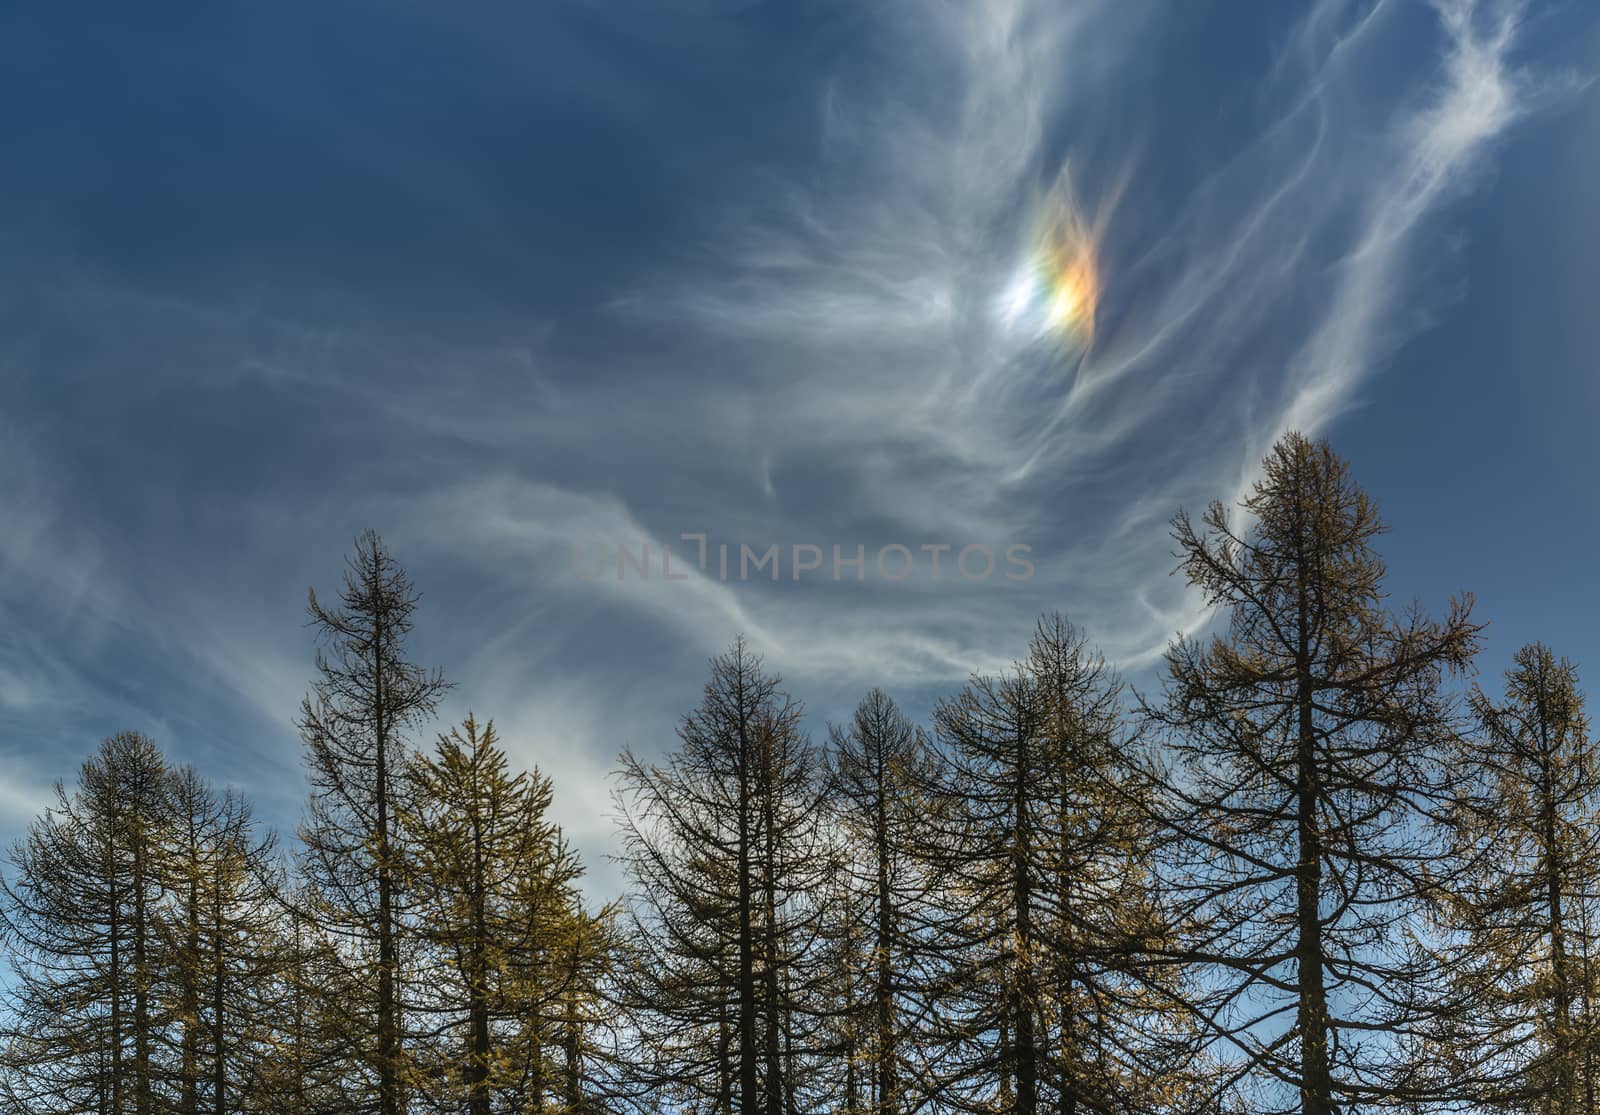 Parhelion in the autumn sky by Mdc1970